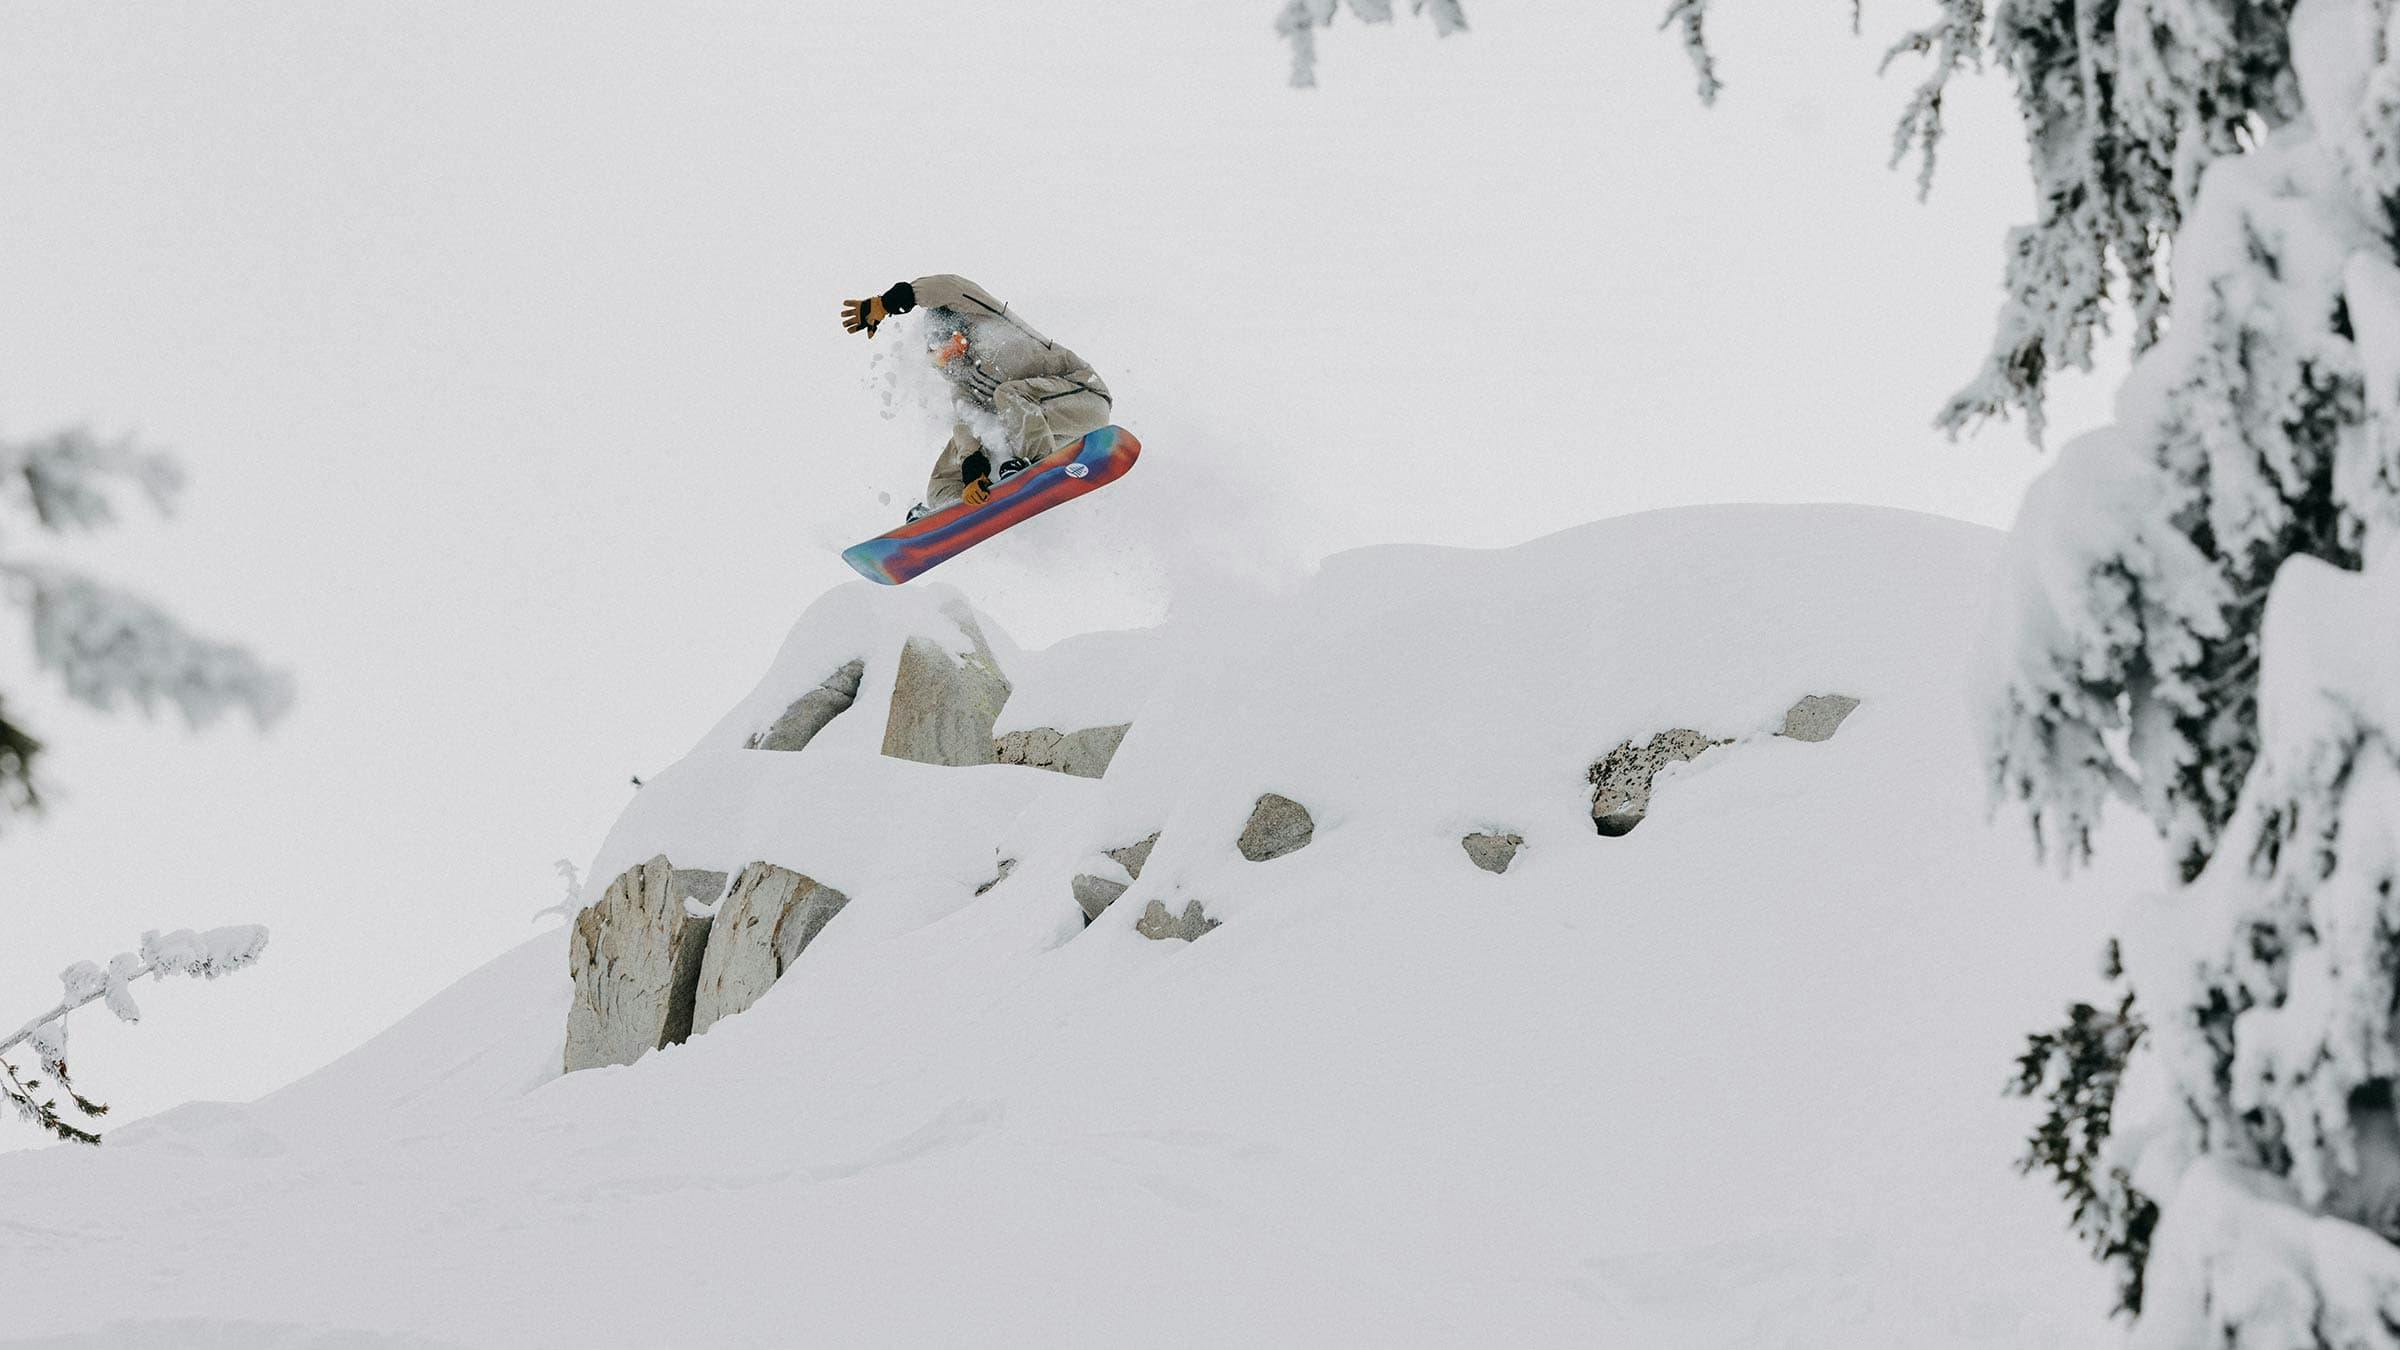 Snowboarder hitting a jump on a powder day at Mammoth Mountain.